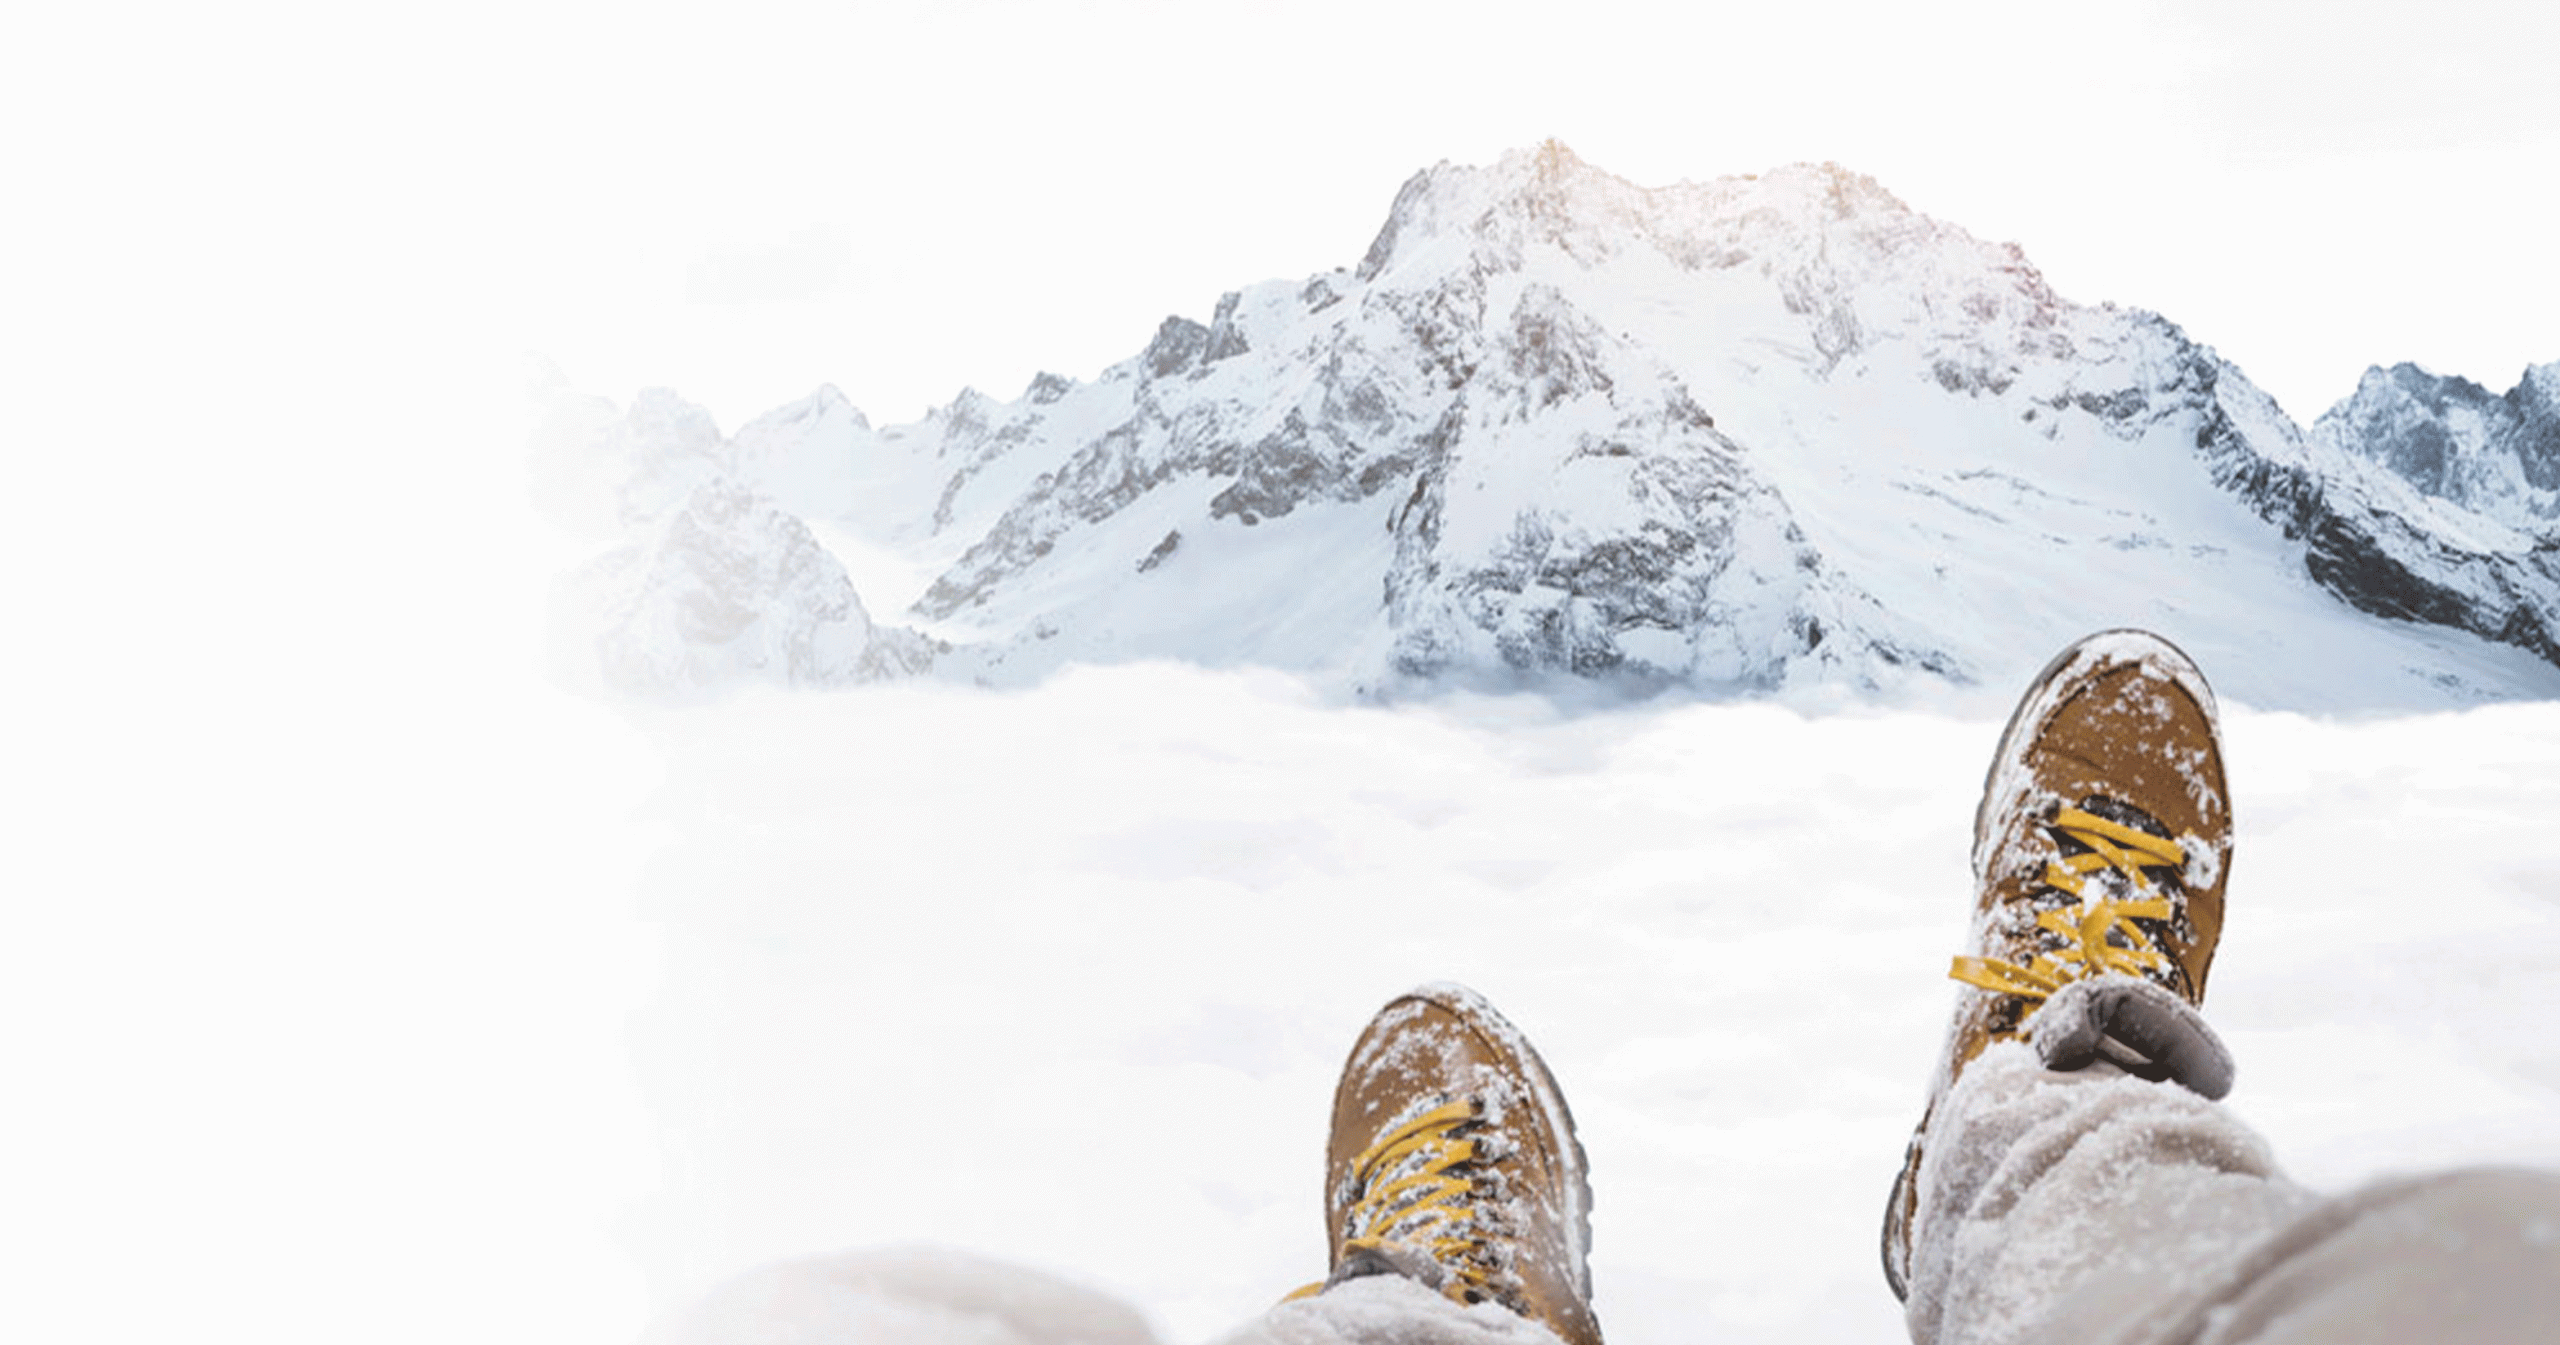 Image of persons legs and boots sitting on top of a snowy mountain